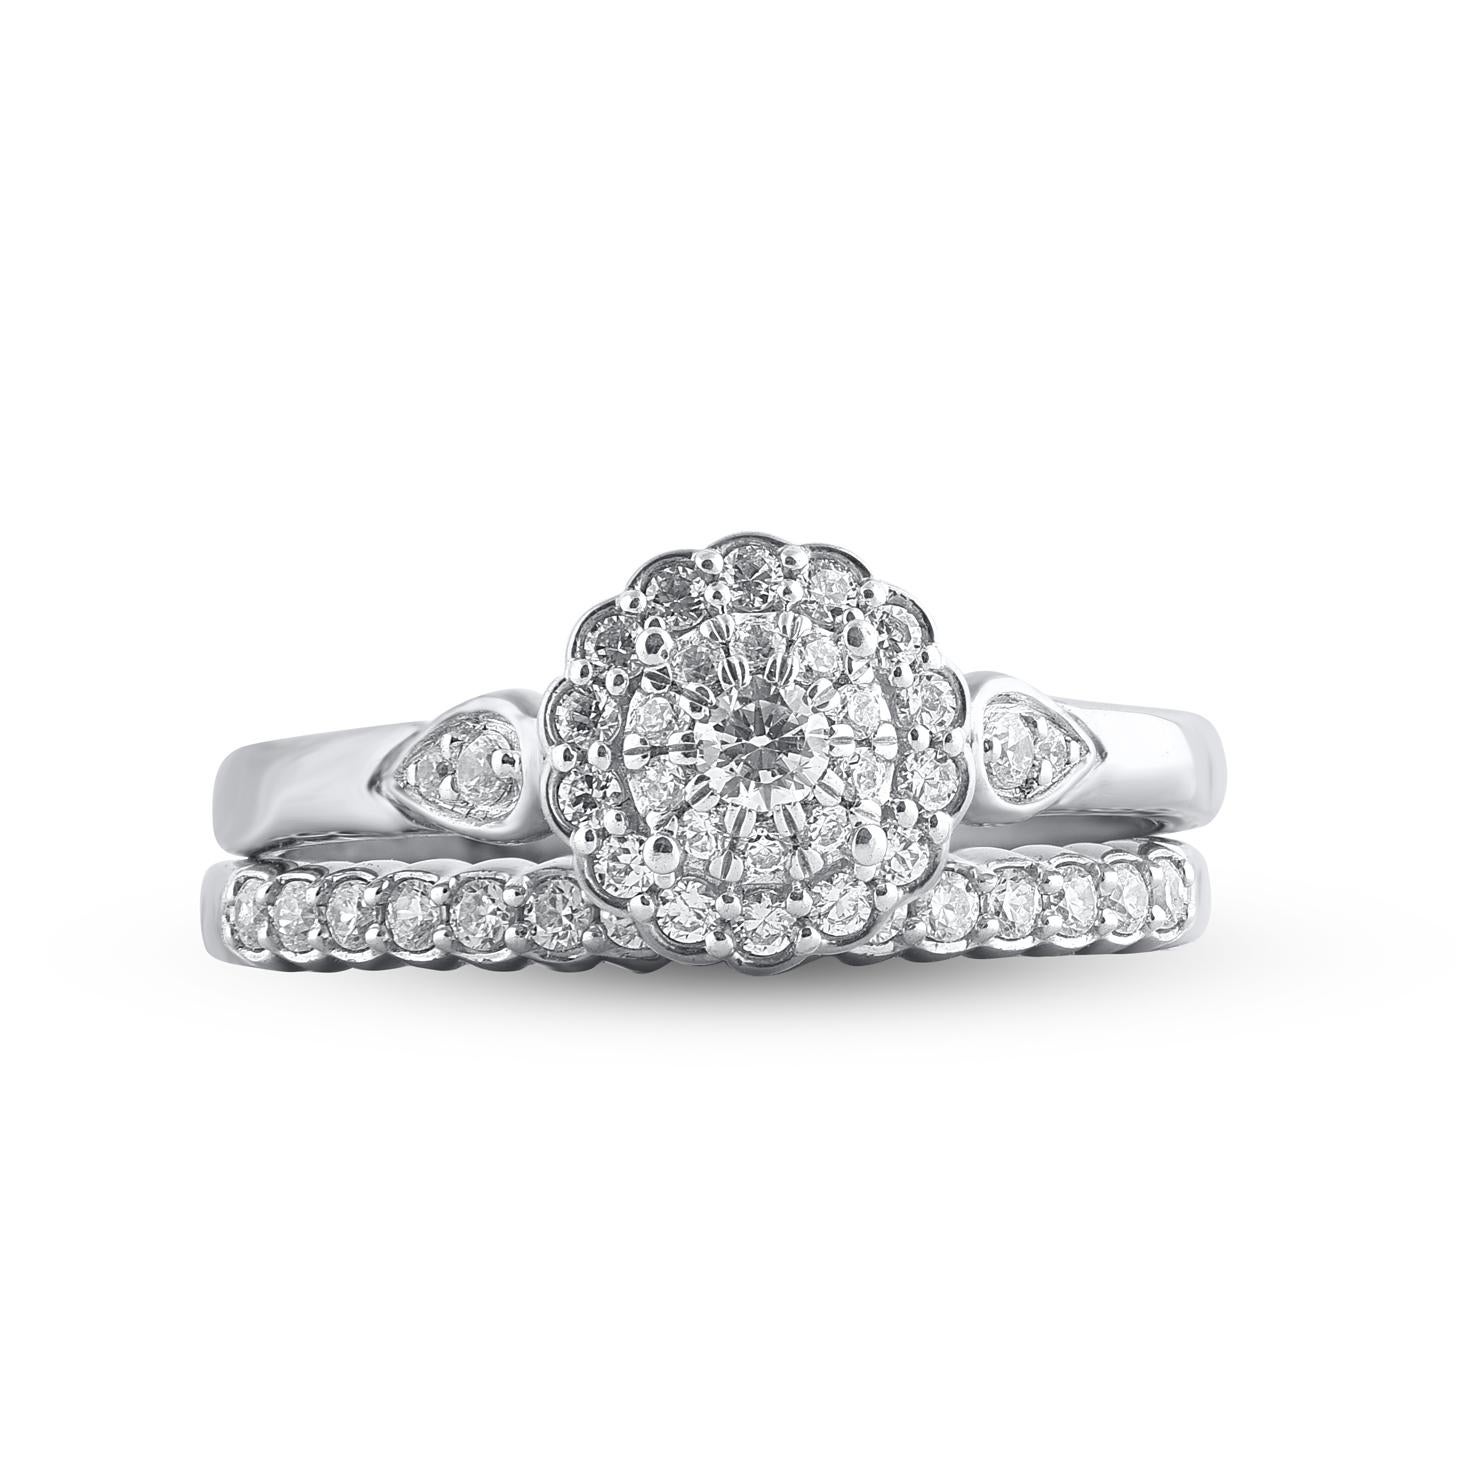 Give her a sophisticated reminder of your love with this diamond ring set. Crafted in 14 Karat white gold. This wedding ring features a sparkling 44 brilliant cut and single cut round diamonds beautifully set in prong & pave setting. The total